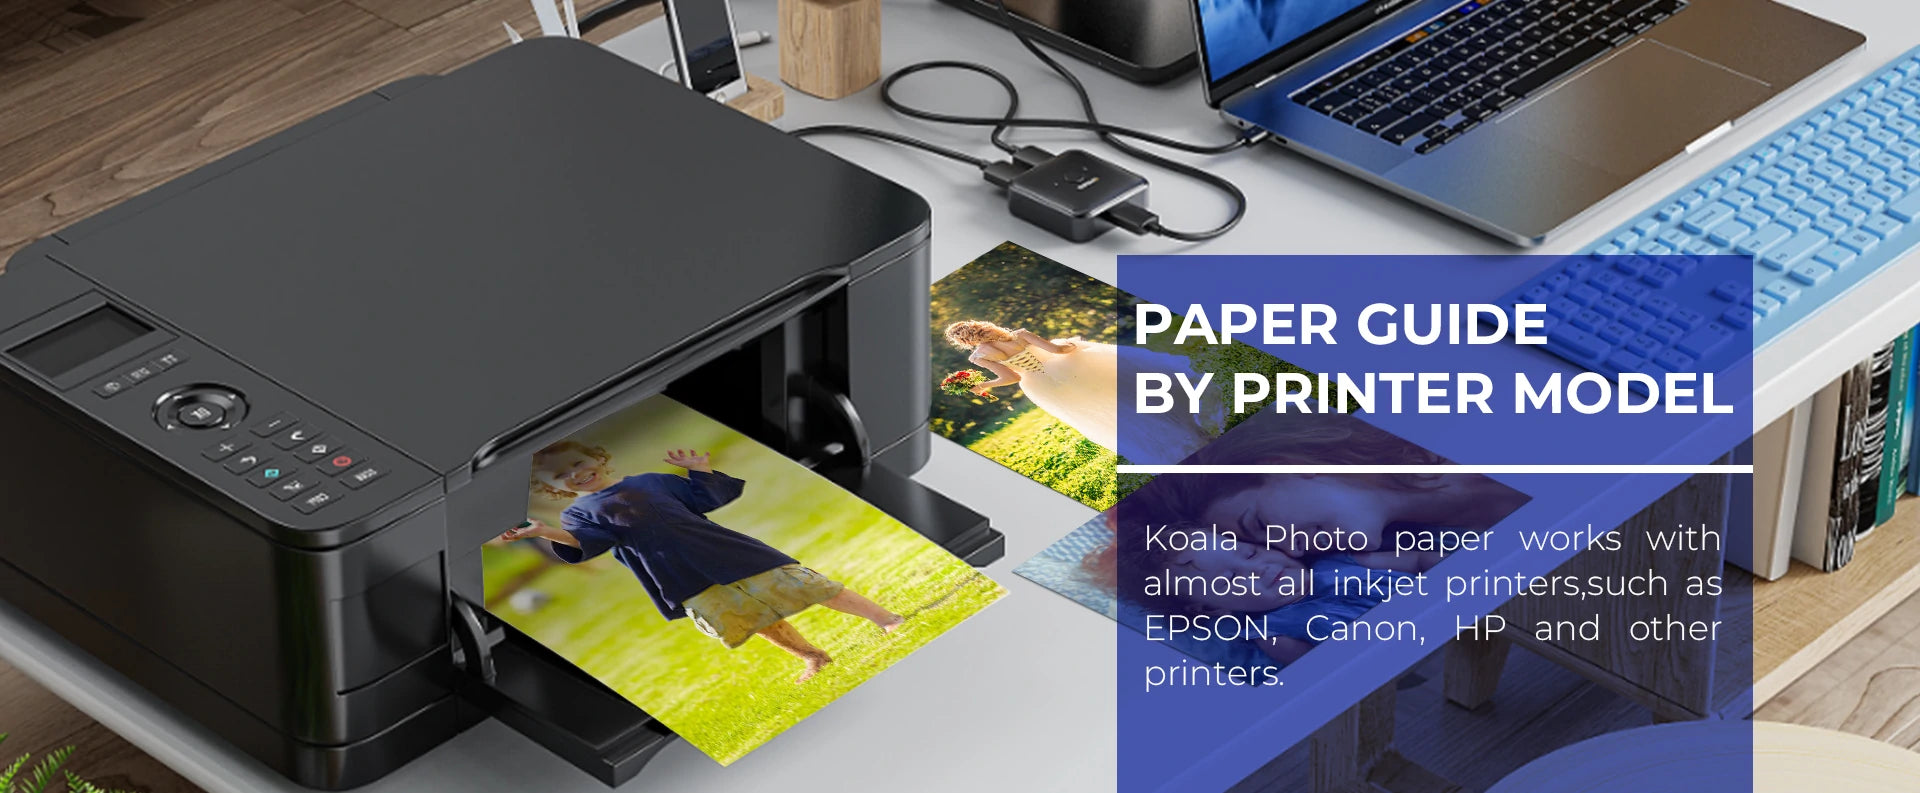 Global Brands' Choice for Quality Photo Paper. Trusted Manufacturing Partner. Koala® Sales Network.